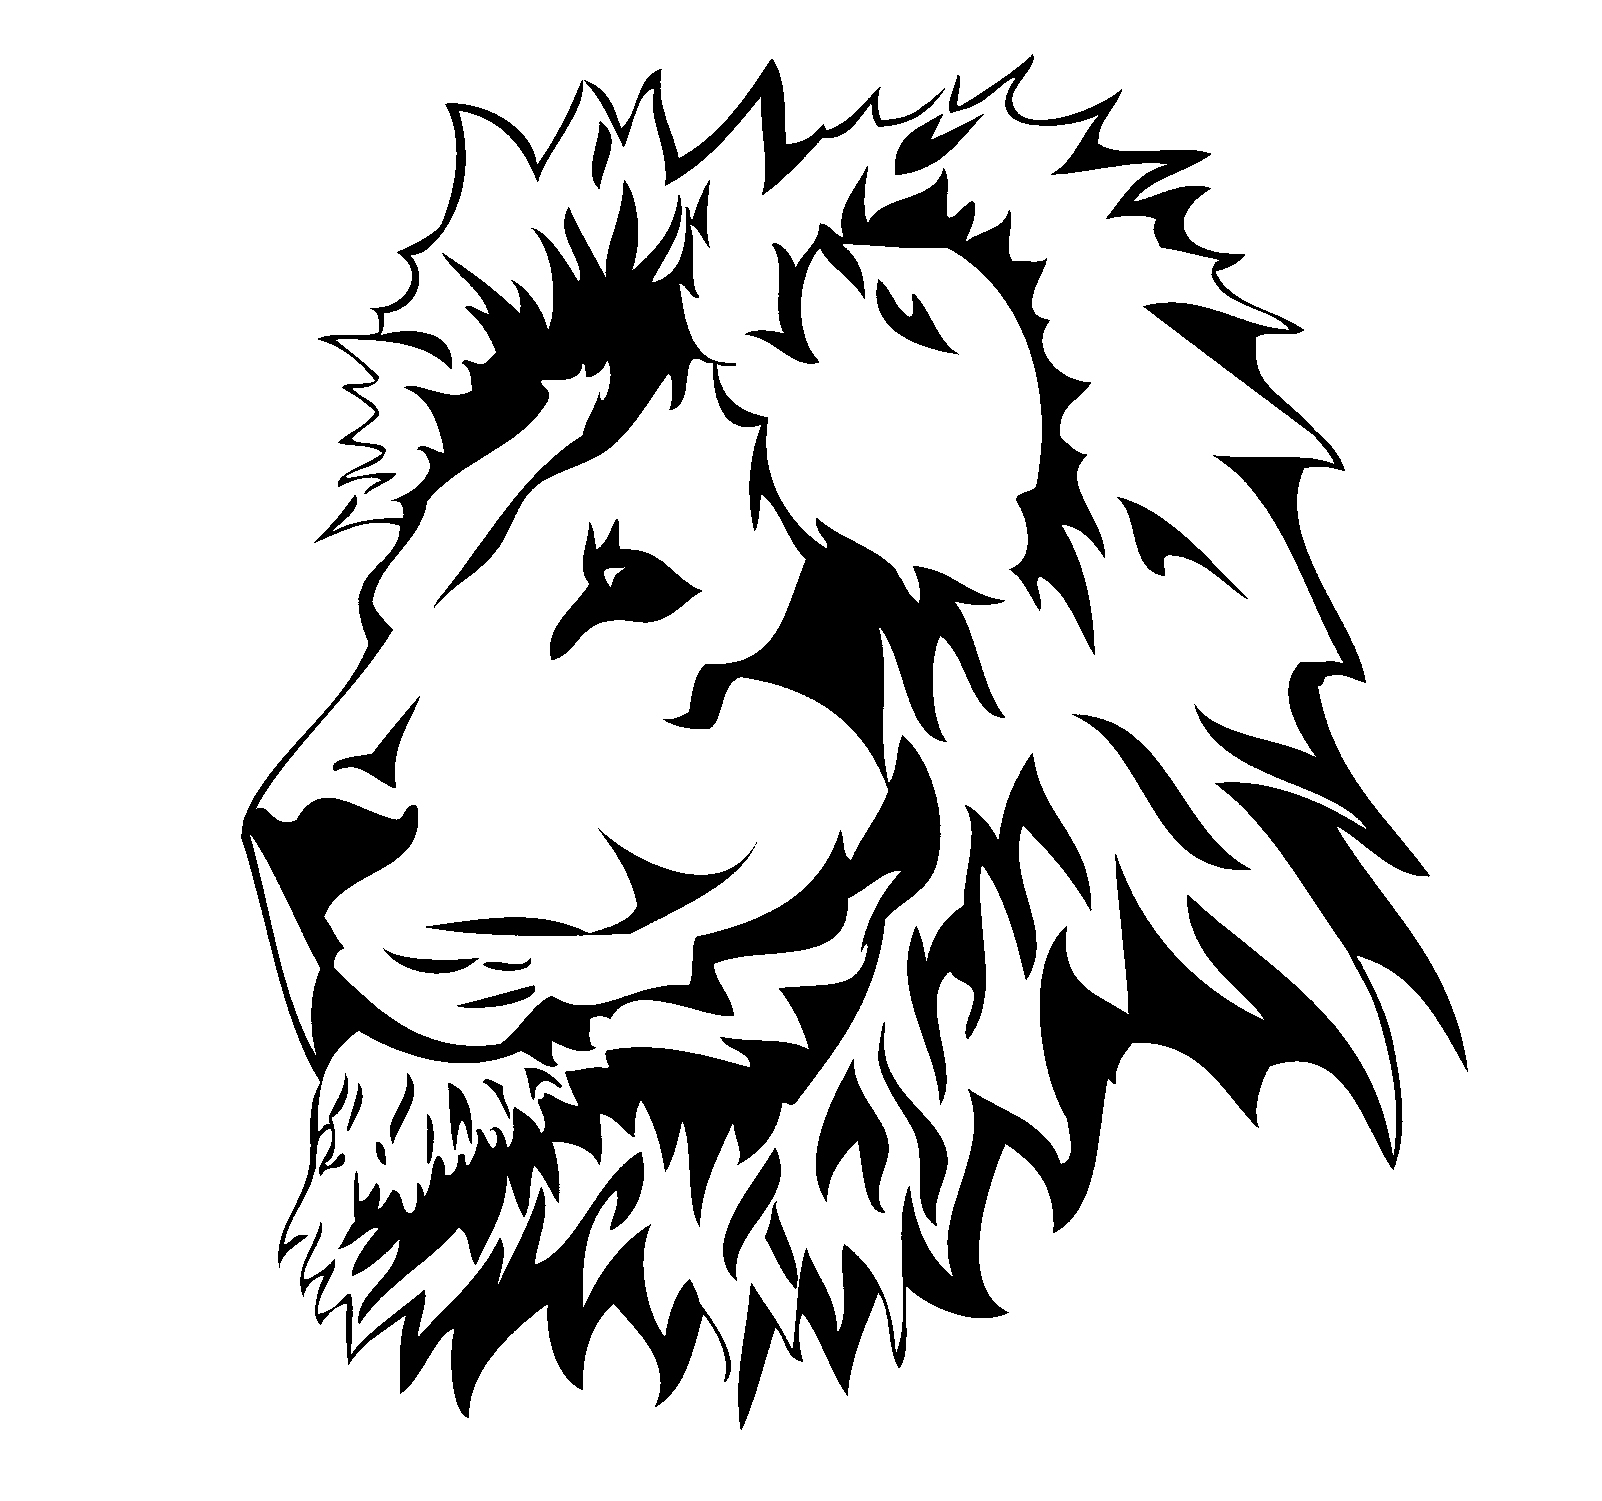 Drawings Of Lions Heads - Clipart library